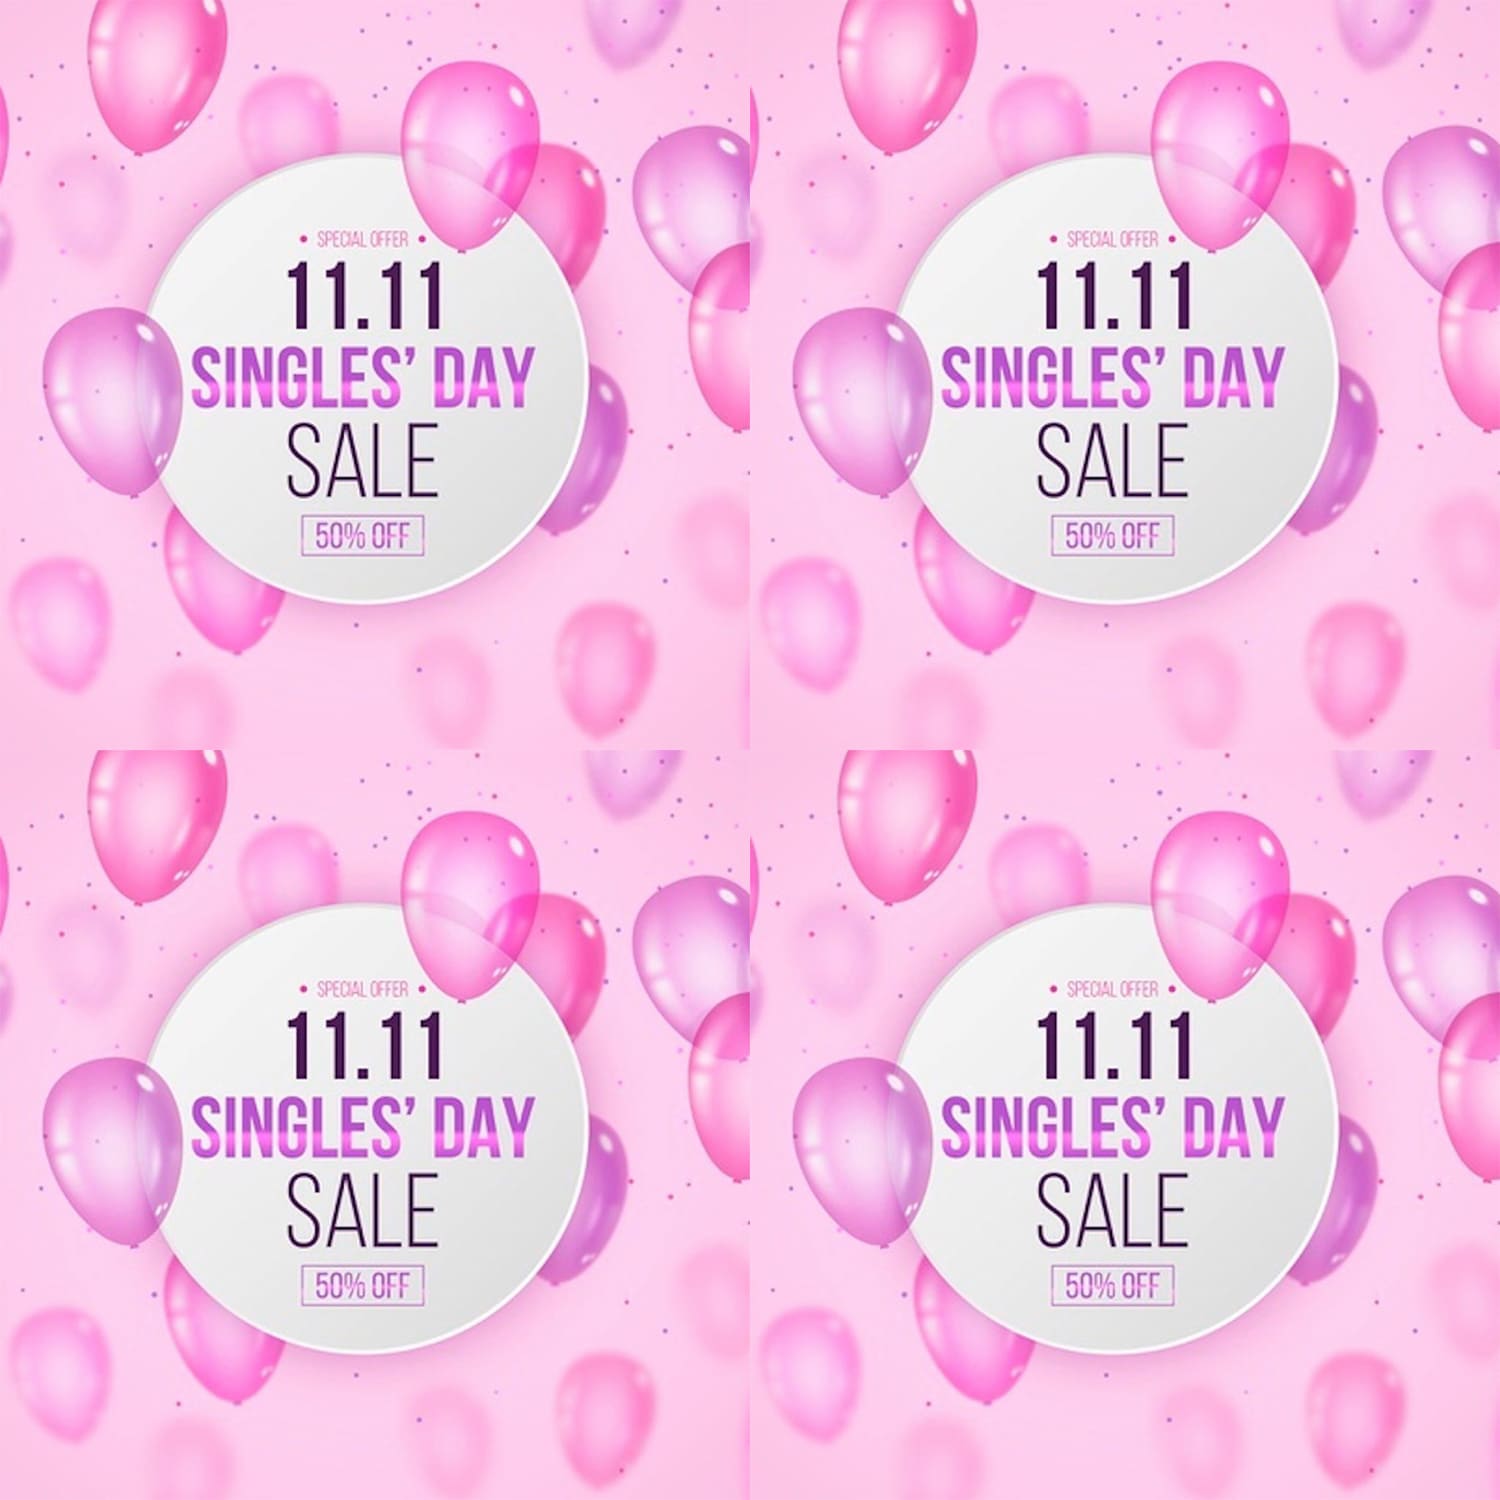 Pink Singles' Day with Realistic Balloons cover image.